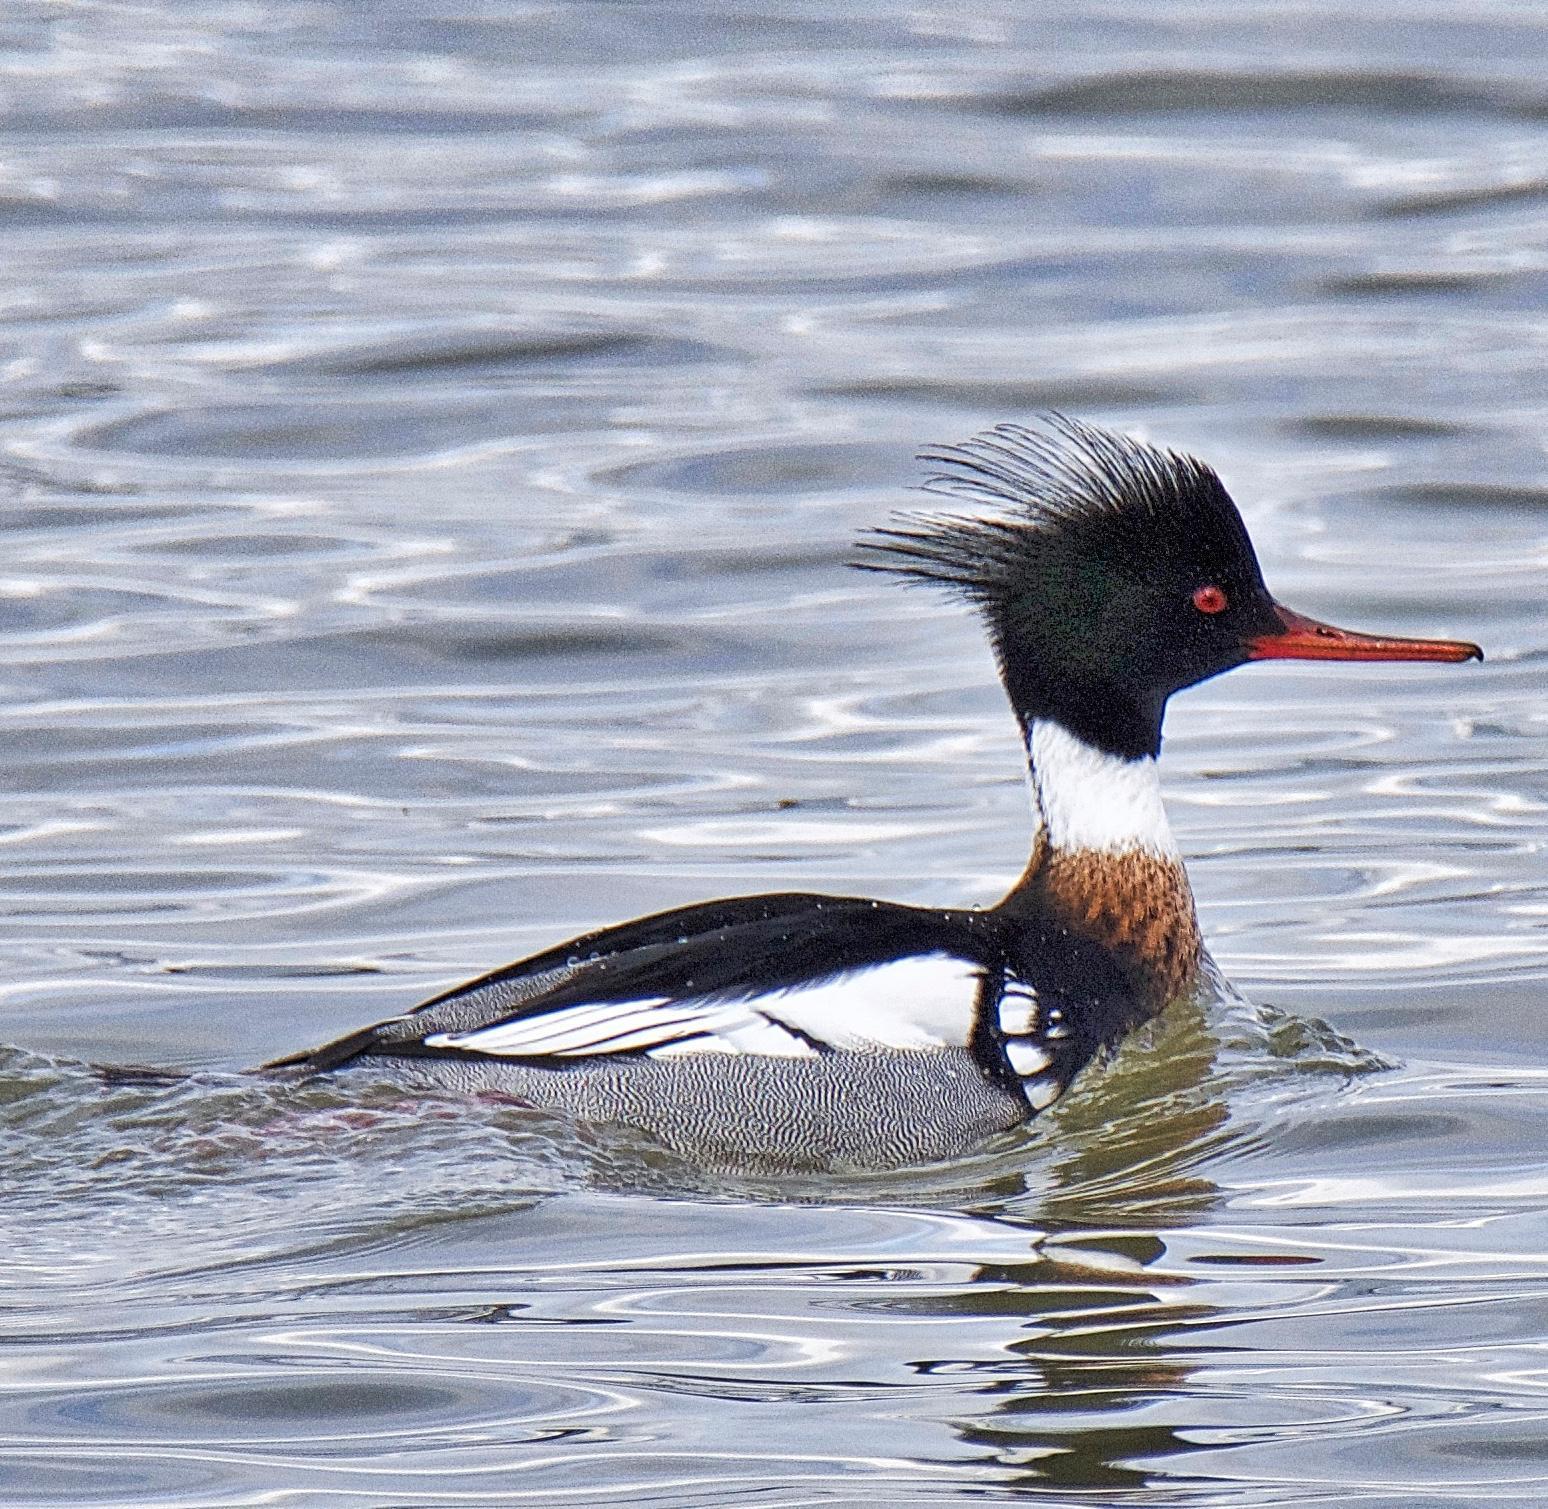 Red-breasted Merganser Photo by Brian Avent